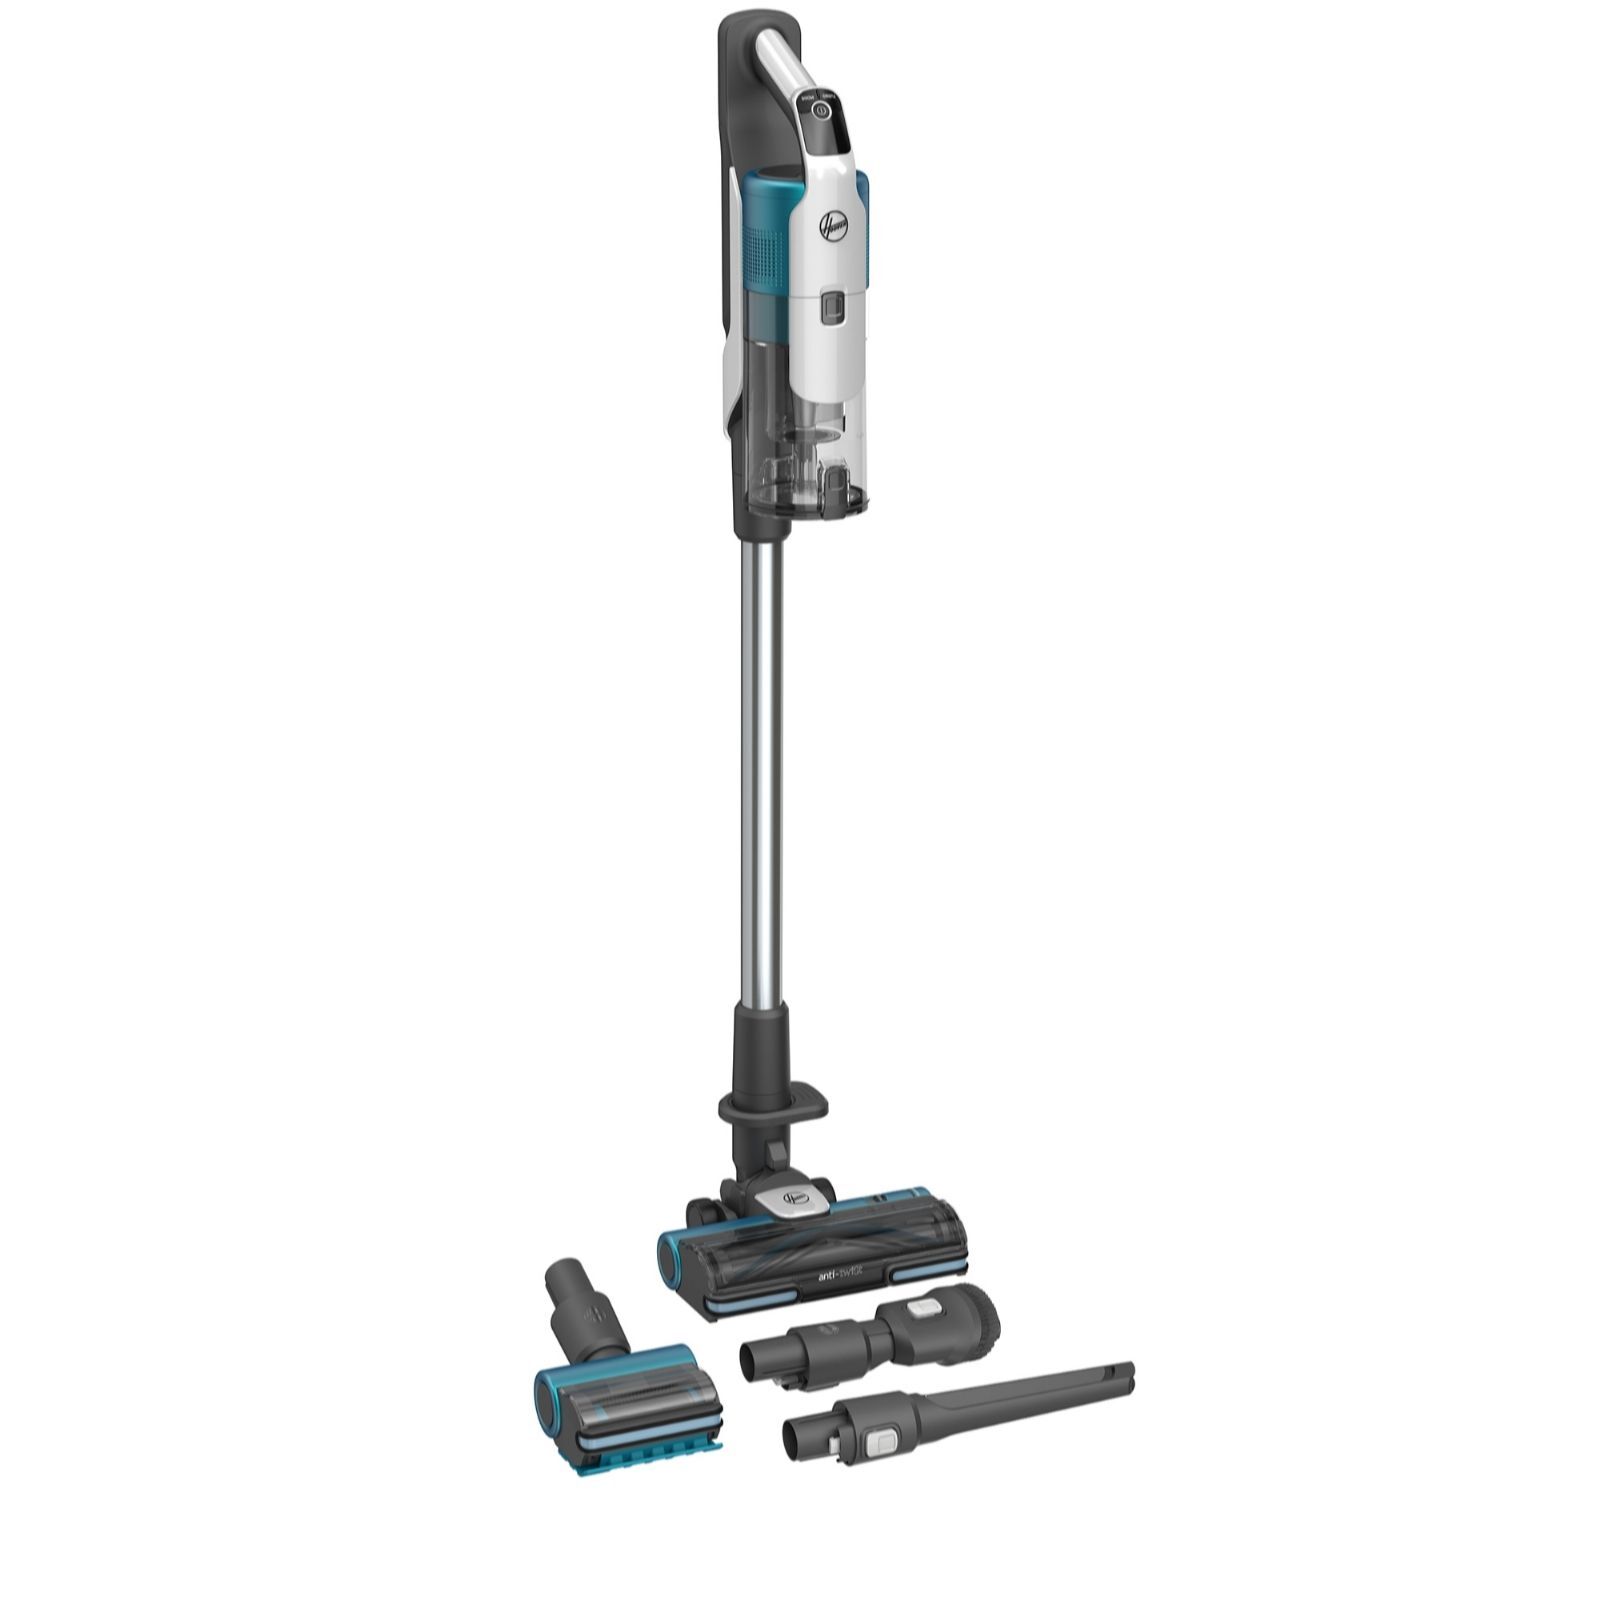 Hoover HF9 Cordless Pet Vacuum Cleaner with Anti Twist